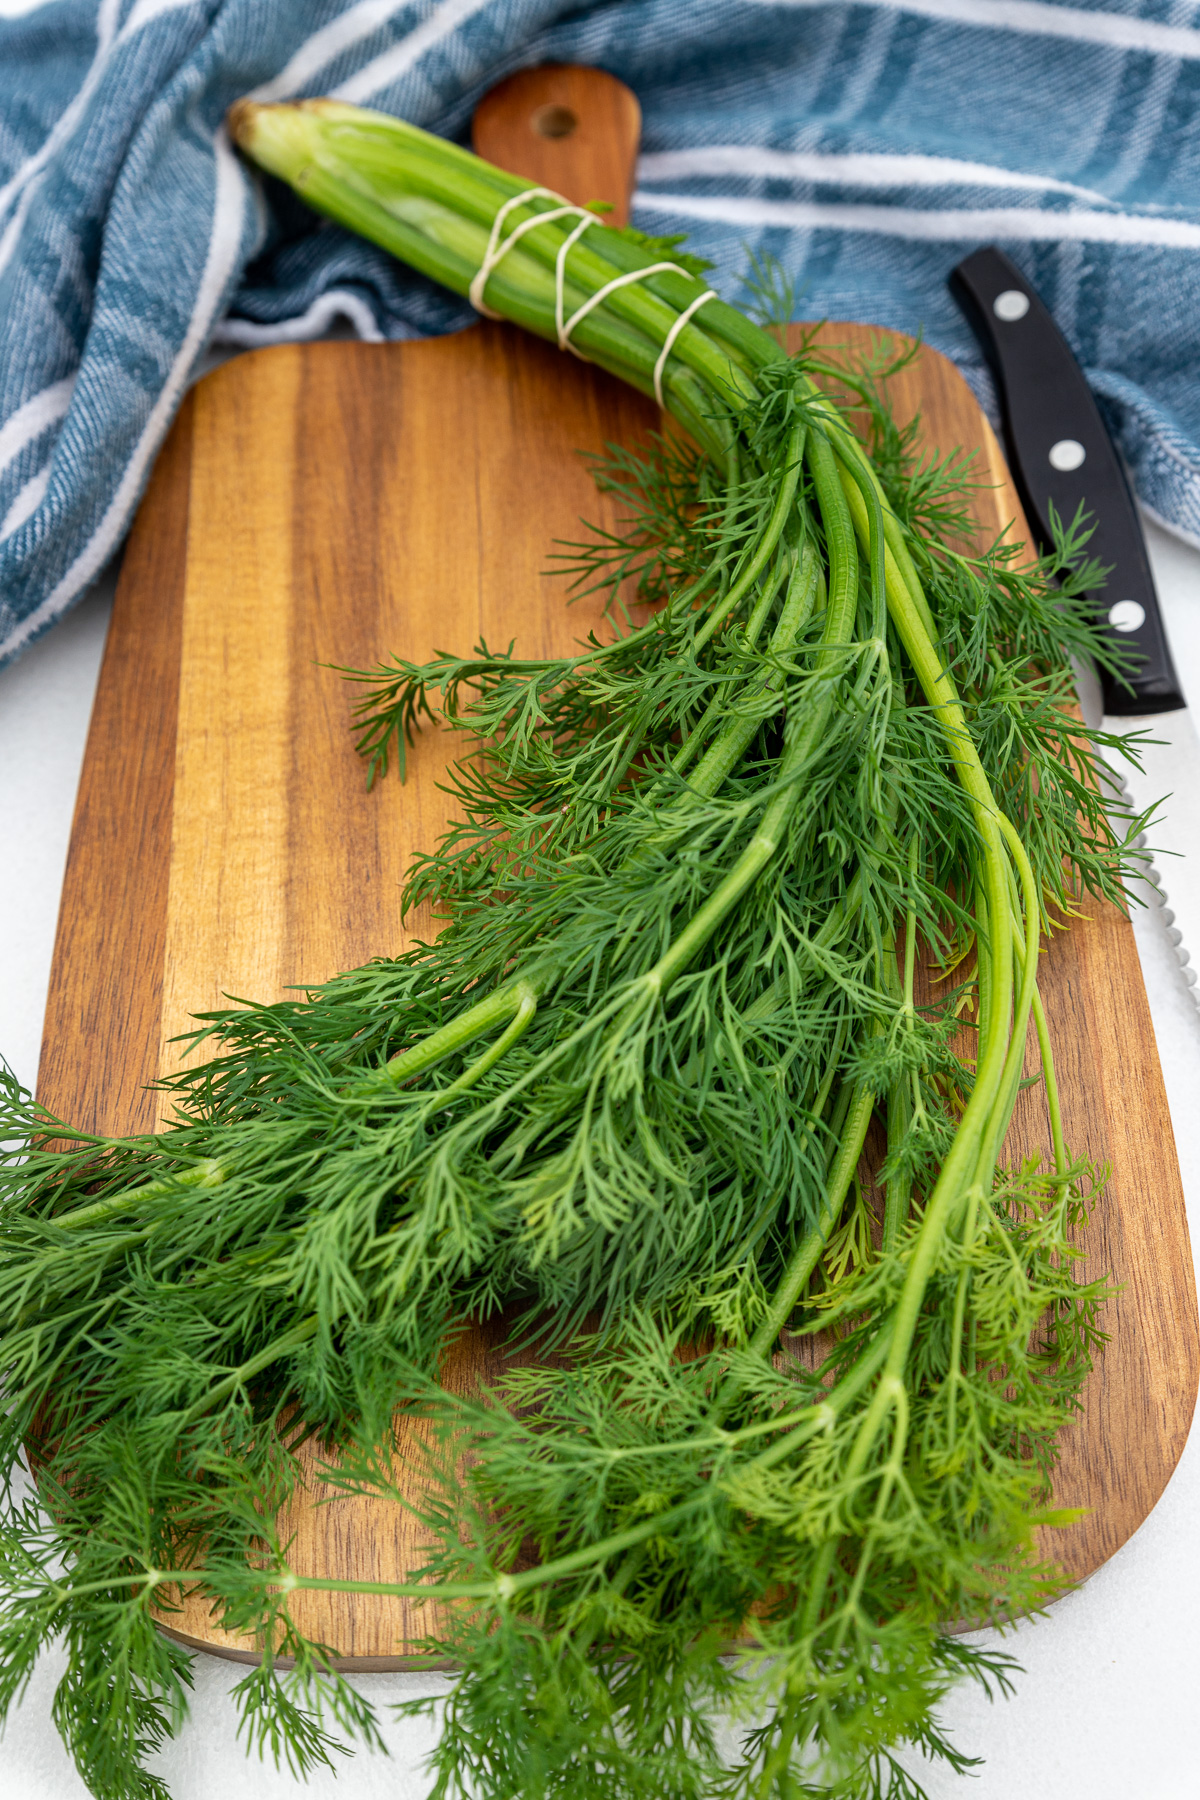 A bunch of fresh green dill on a wooden chopping board with a knife and a blue and white tea towel behind.